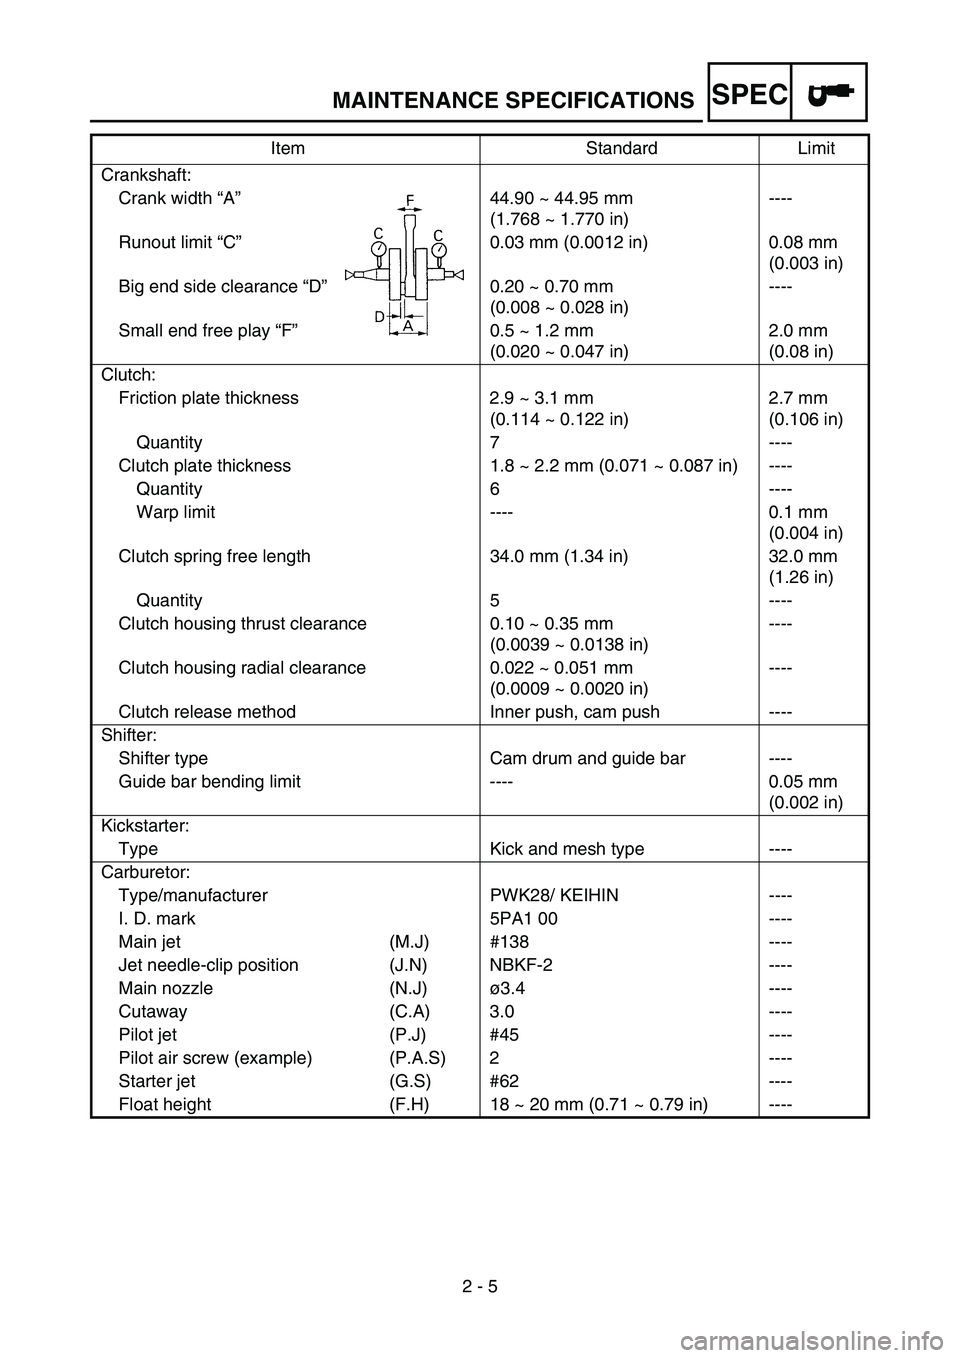 YAMAHA YZ85 2003  Notices Demploi (in French) SPEC
2 - 5
MAINTENANCE SPECIFICATIONS
Crankshaft:
Crank width “A”44.90 ~ 44.95 mm 
(1.768 ~ 1.770 in)----
Runout limit “C”0.03 mm (0.0012 in) 0.08 mm 
(0.003 in)
Big end side clearance “D”